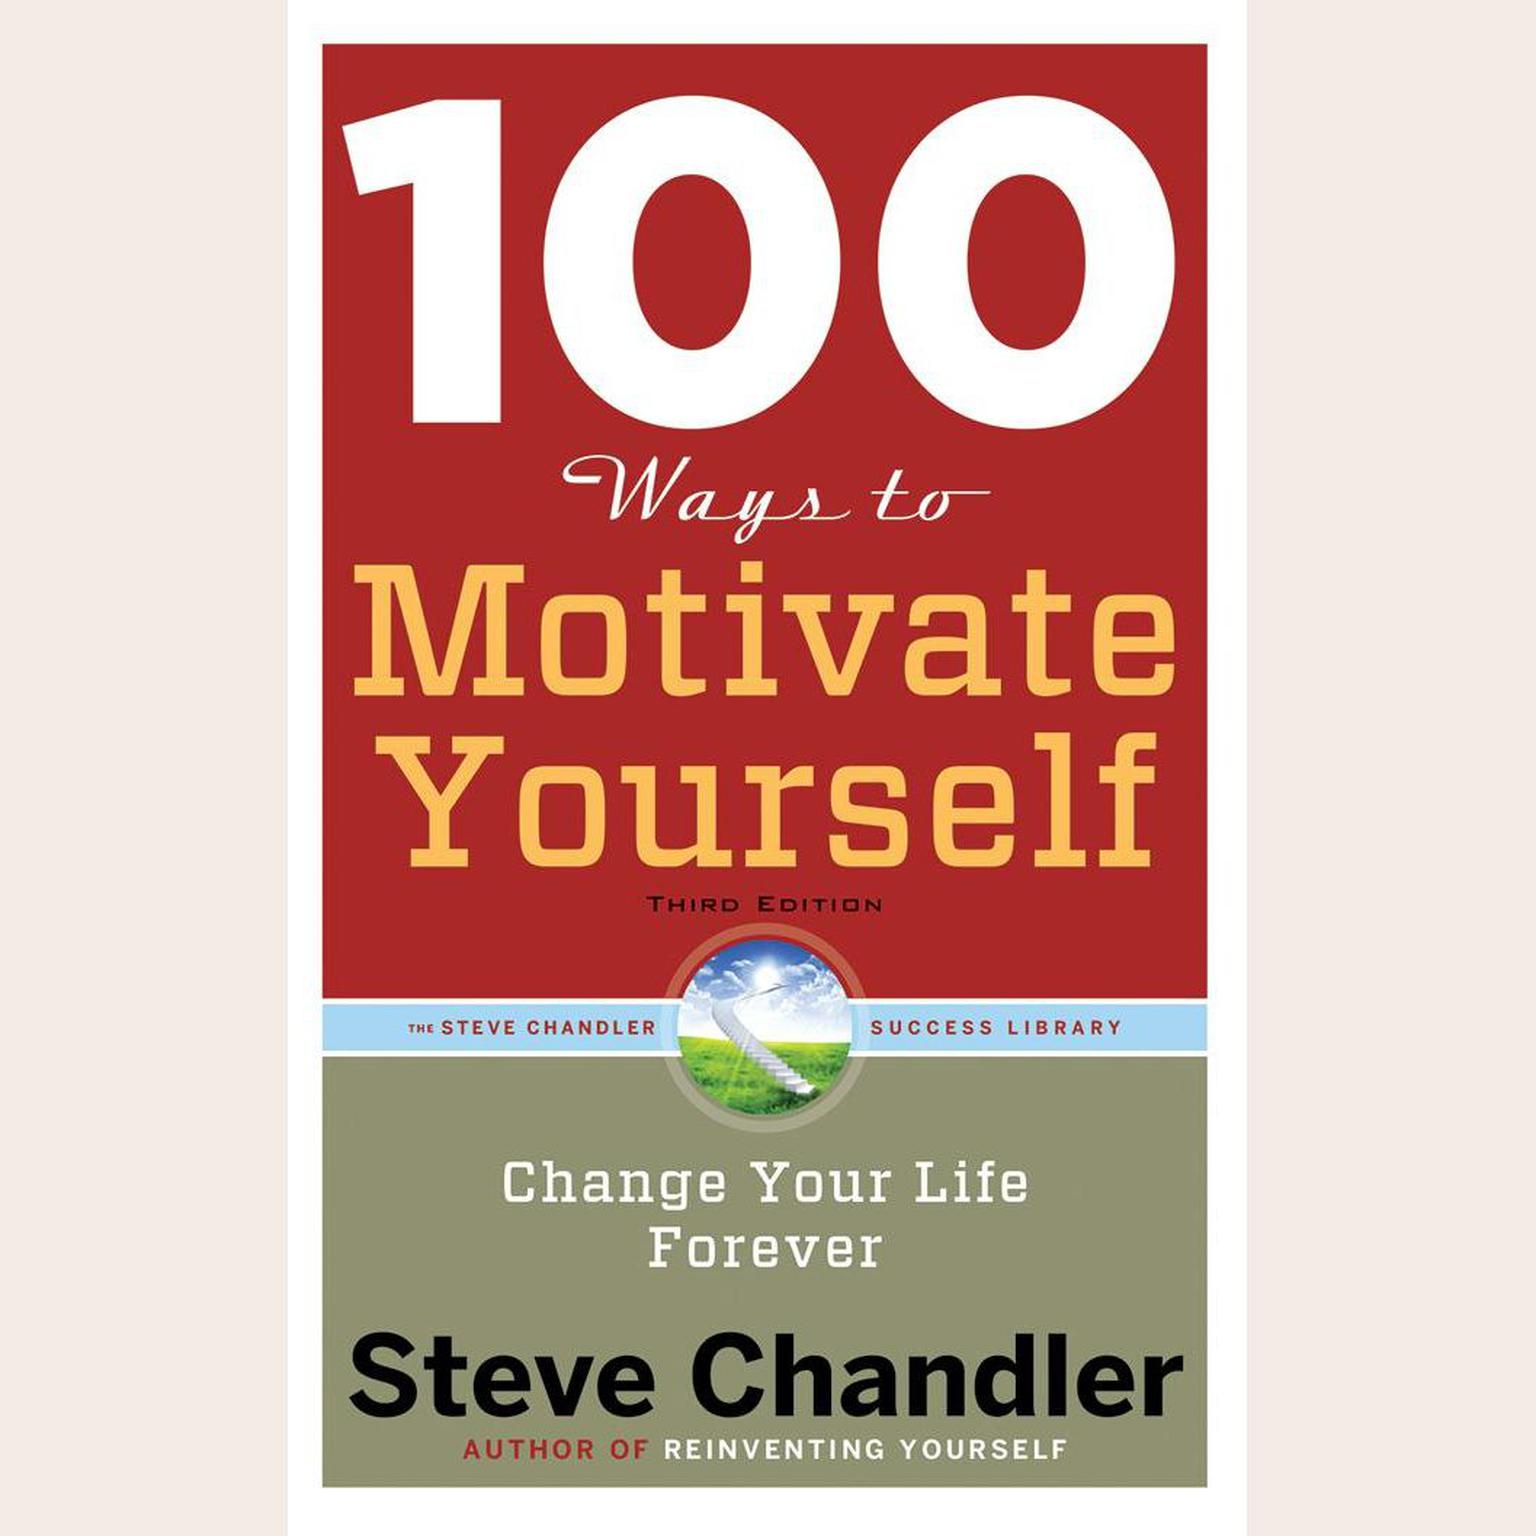 100 Ways to Motivate Yourself, Third Edition: Change Your Life Forever Audiobook, by Steve Chandler